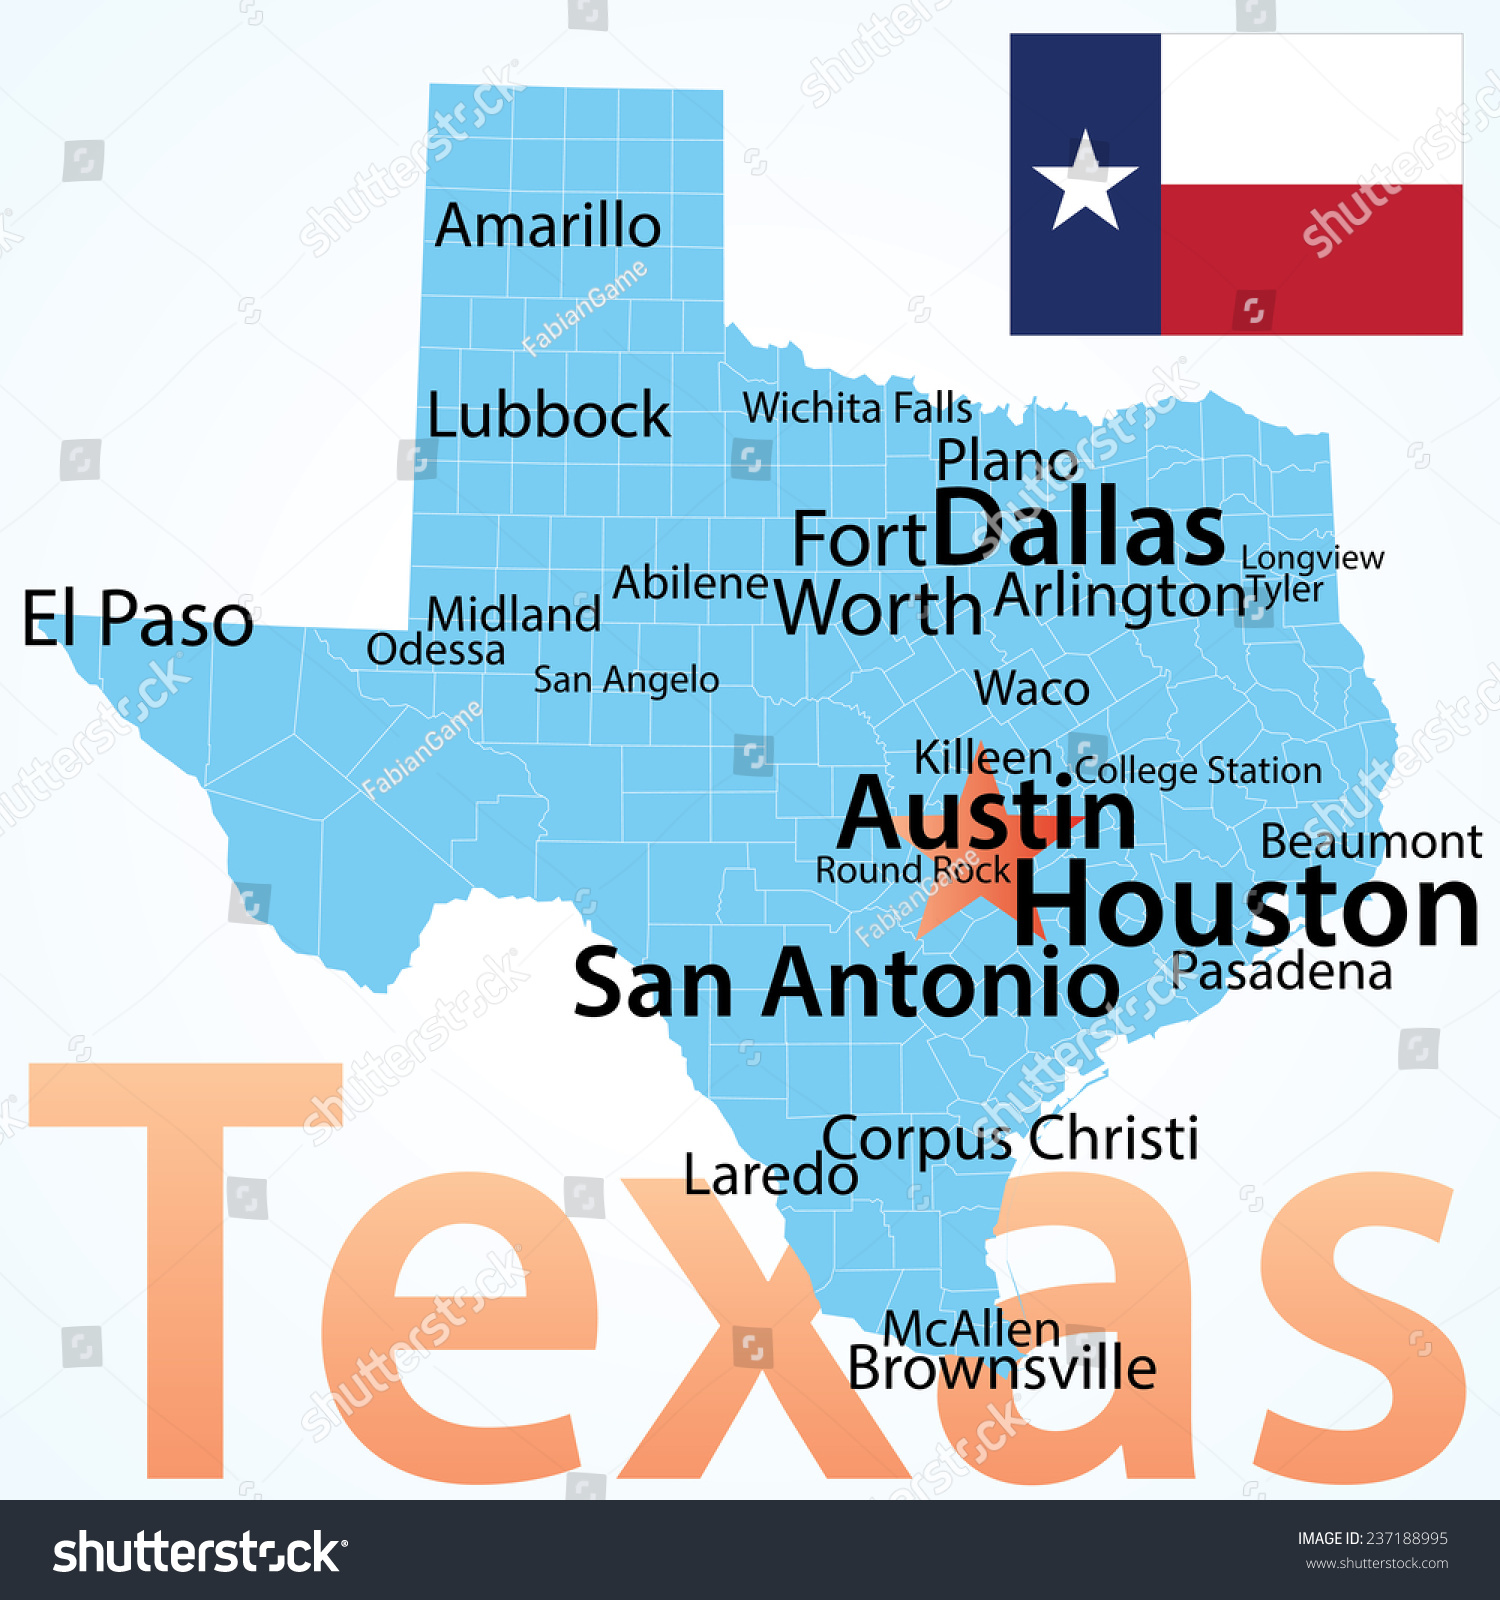 Where can you find a map of Texas that shows cities?